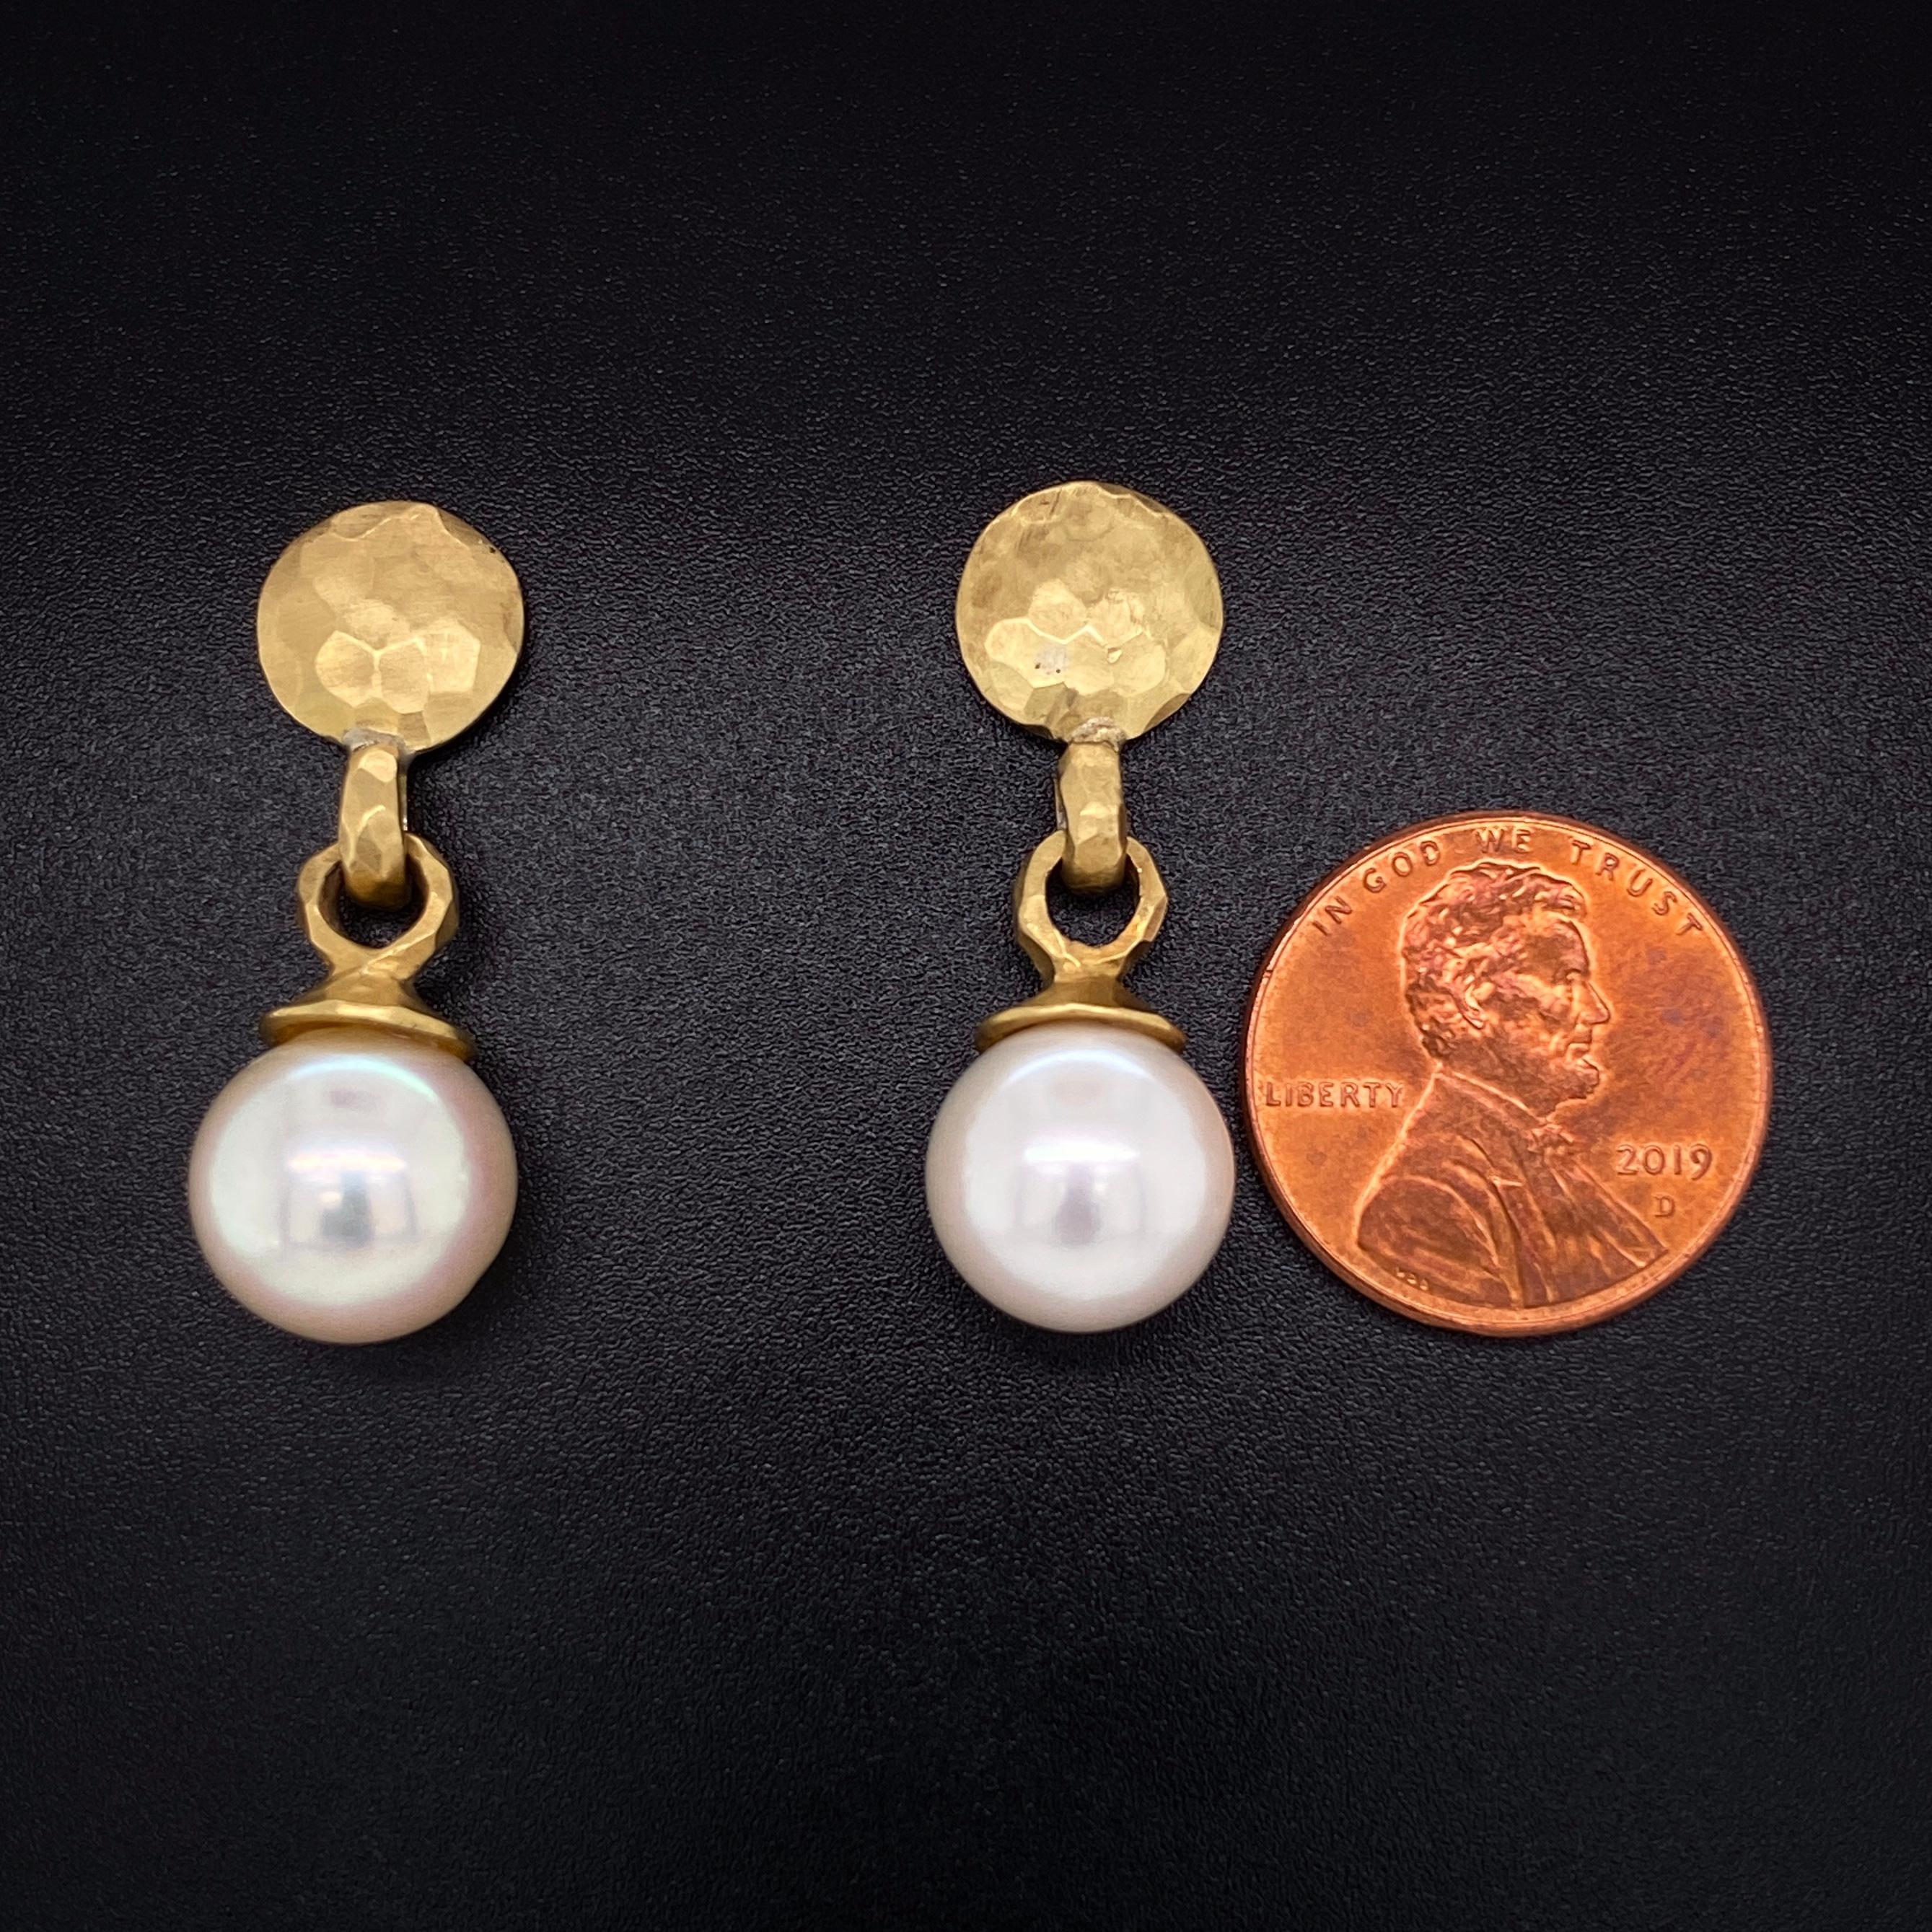 Simply Beautiful 11.5mm South Sea Pearl Drop Earrings. Hand crafted and Hand Hammered in 18 Karat Yellow Gold. Measuring approx. 1.25” l x 0.43”w x 0.46” d. Earring backs are 14K Gold, post and friction system. Chic and Classic…A perfect complement